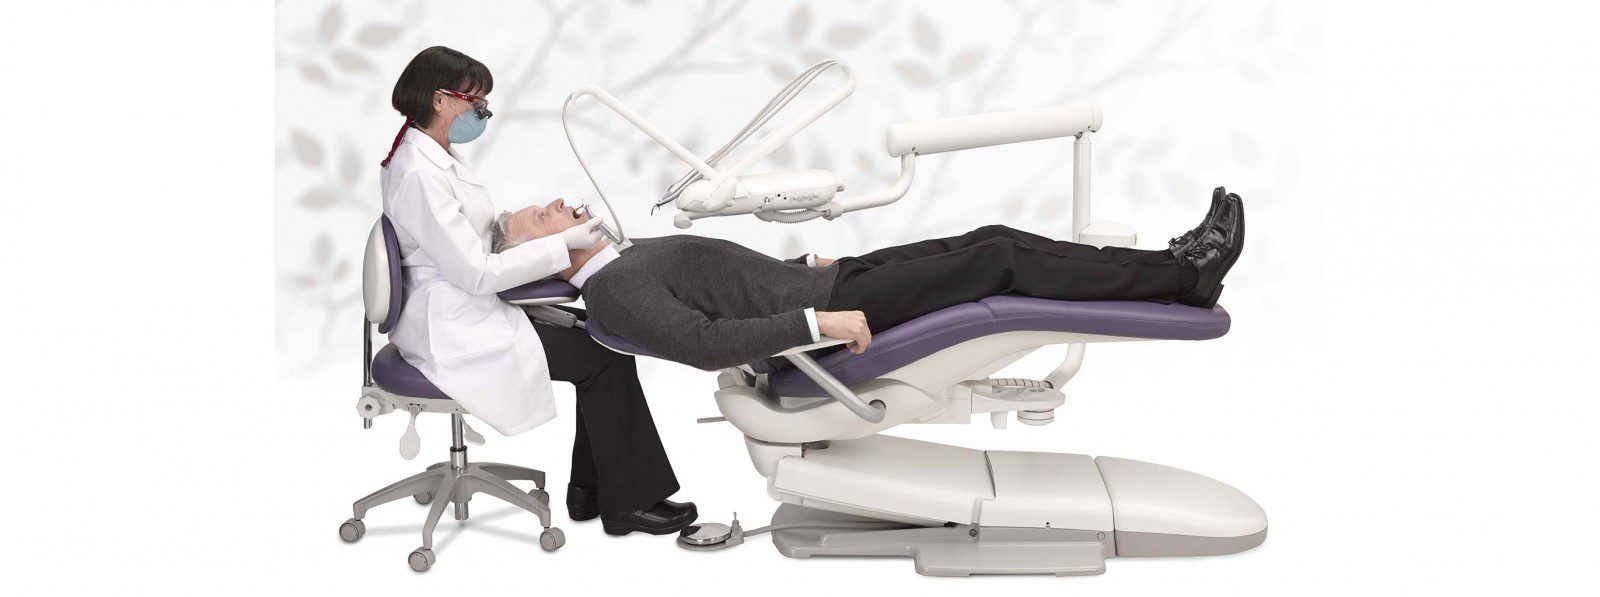 Dental Chairs - Your 'Independent' Dealer for A-dec and Belmont